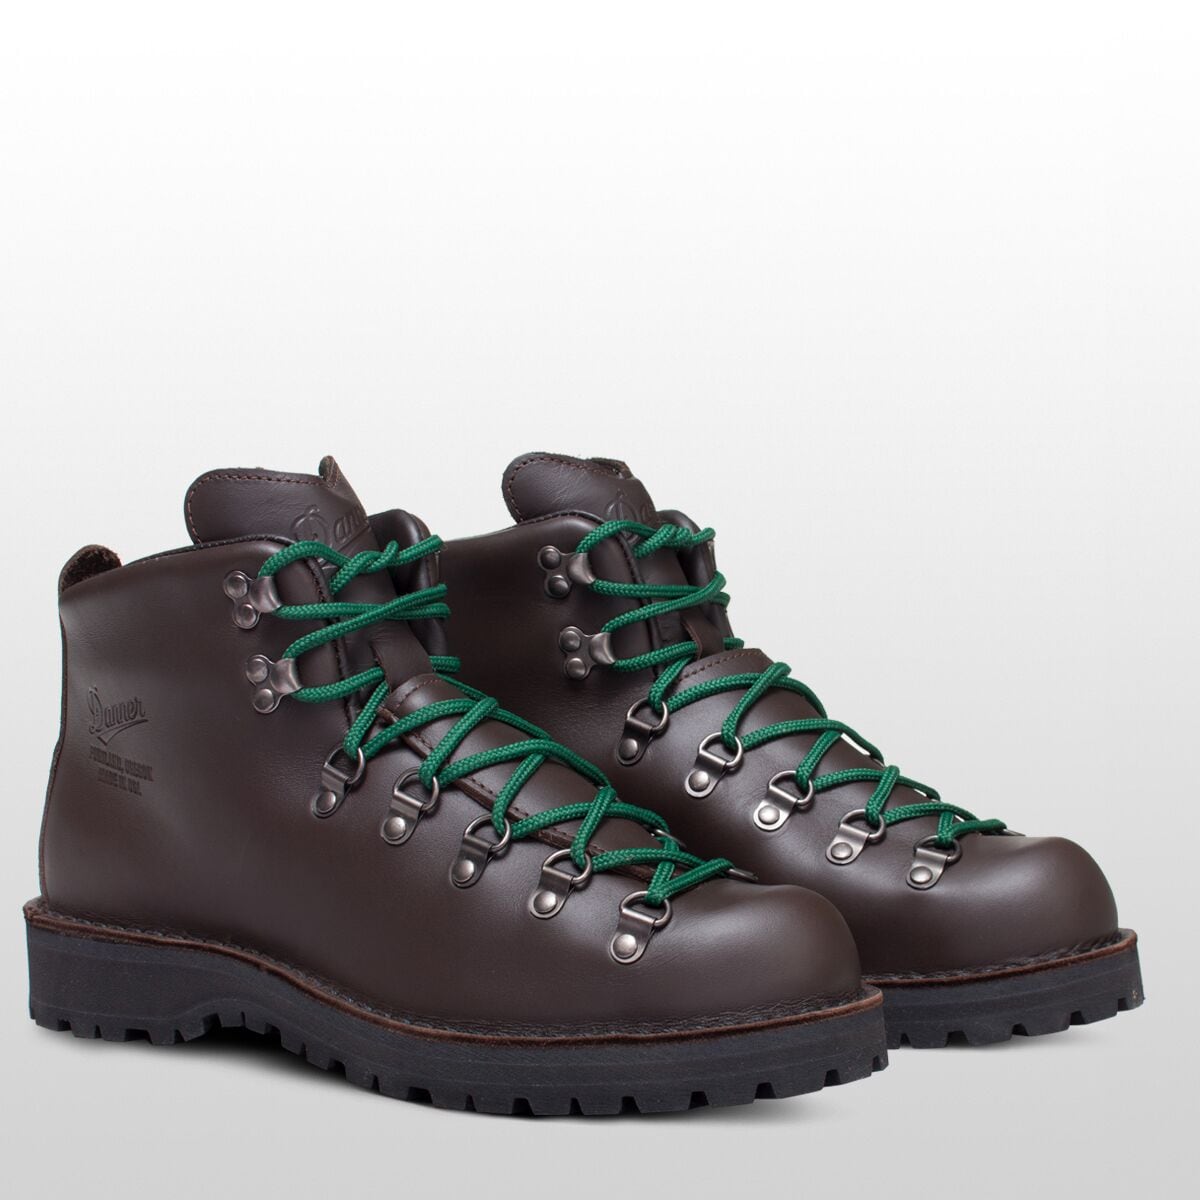 Danner Mountain Light 2 Leather Hiking